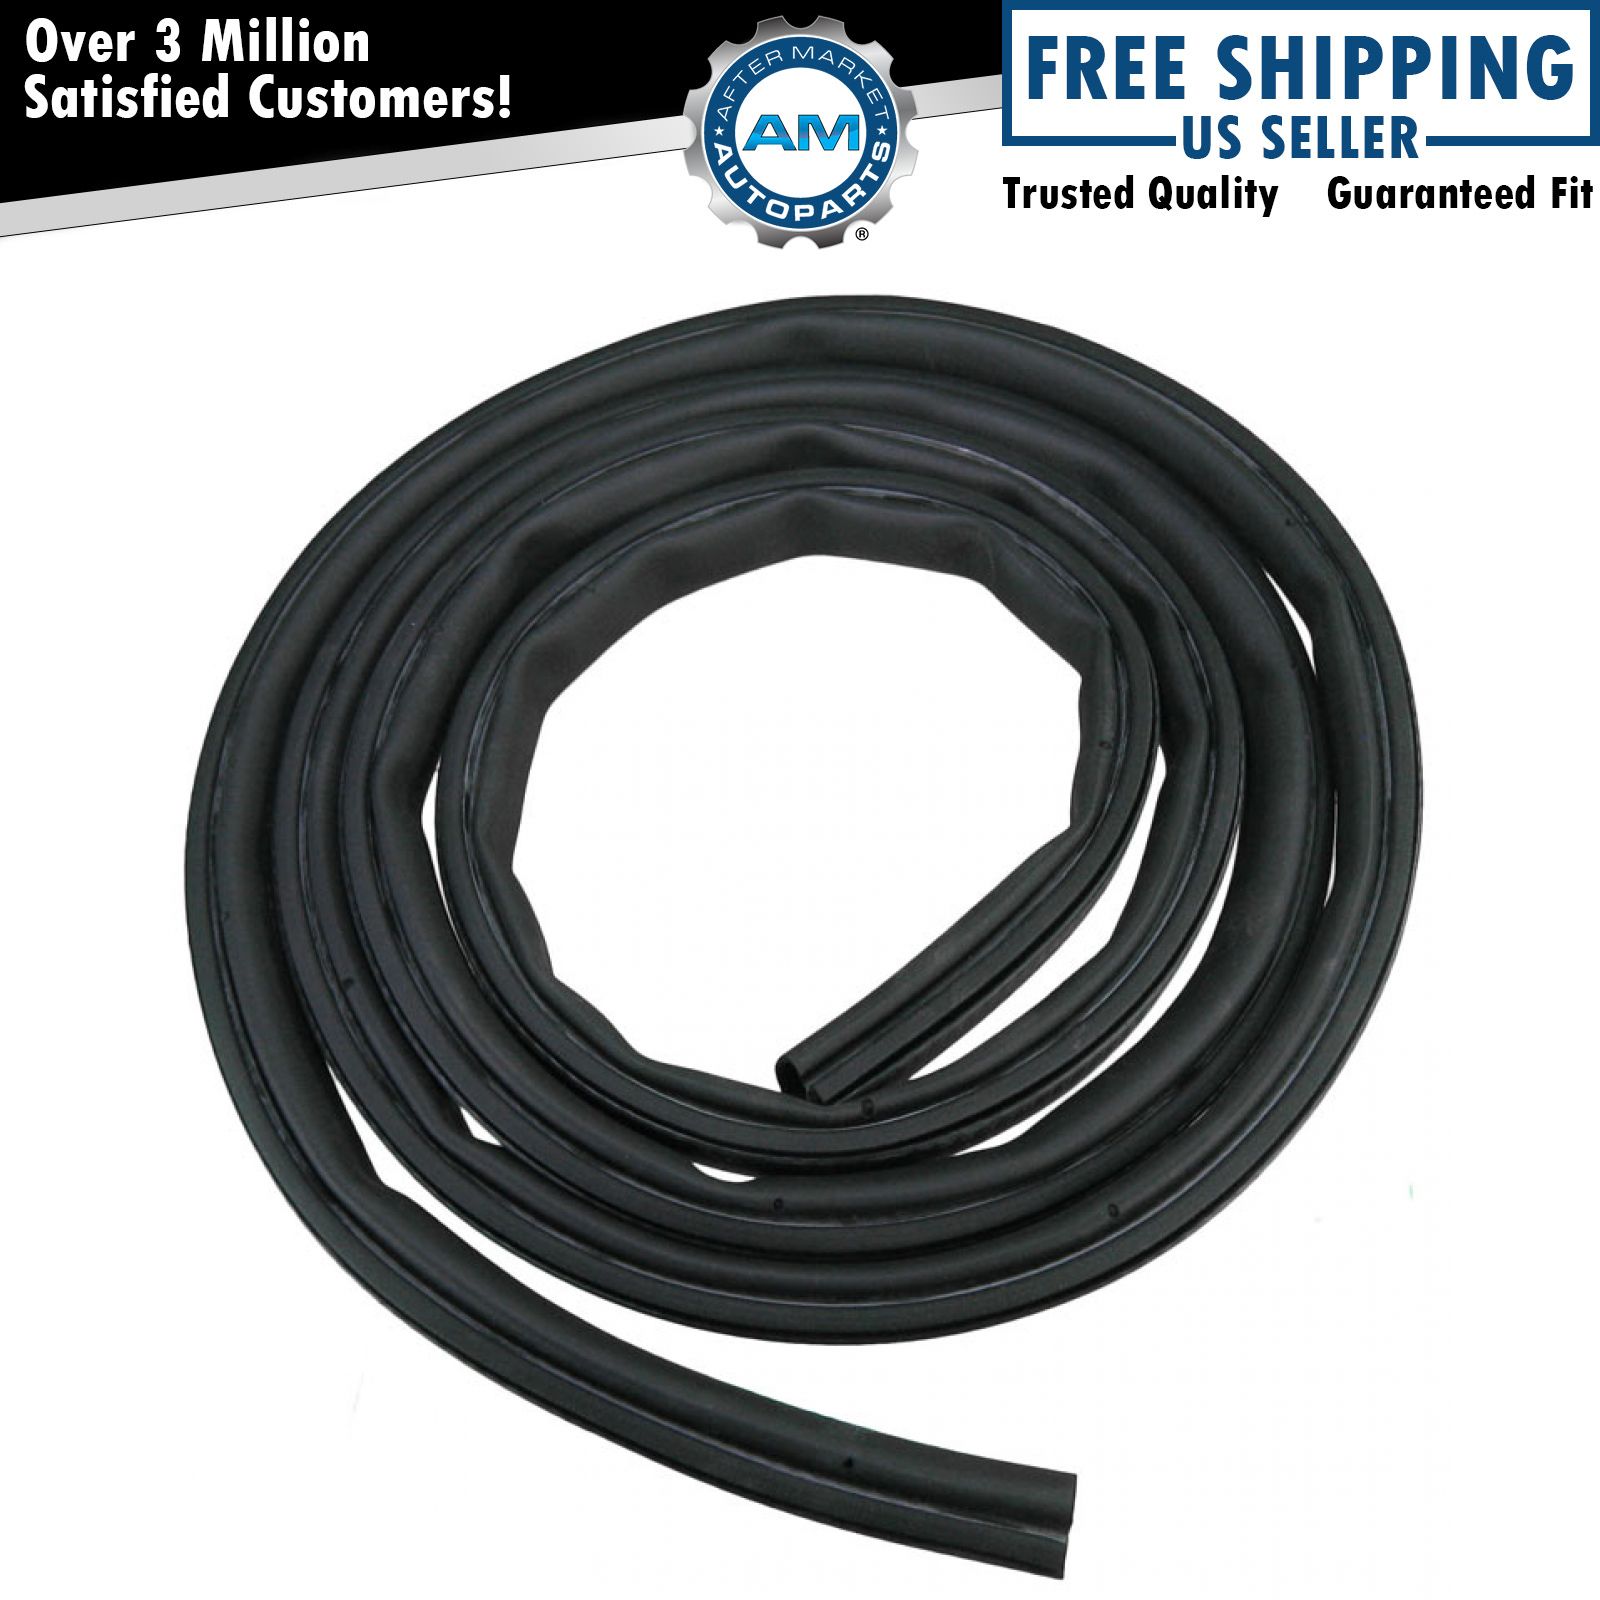 Rear Door Rubber Weatherstrip Seal for Chevy GMC Suburban SUV Pickup Truck